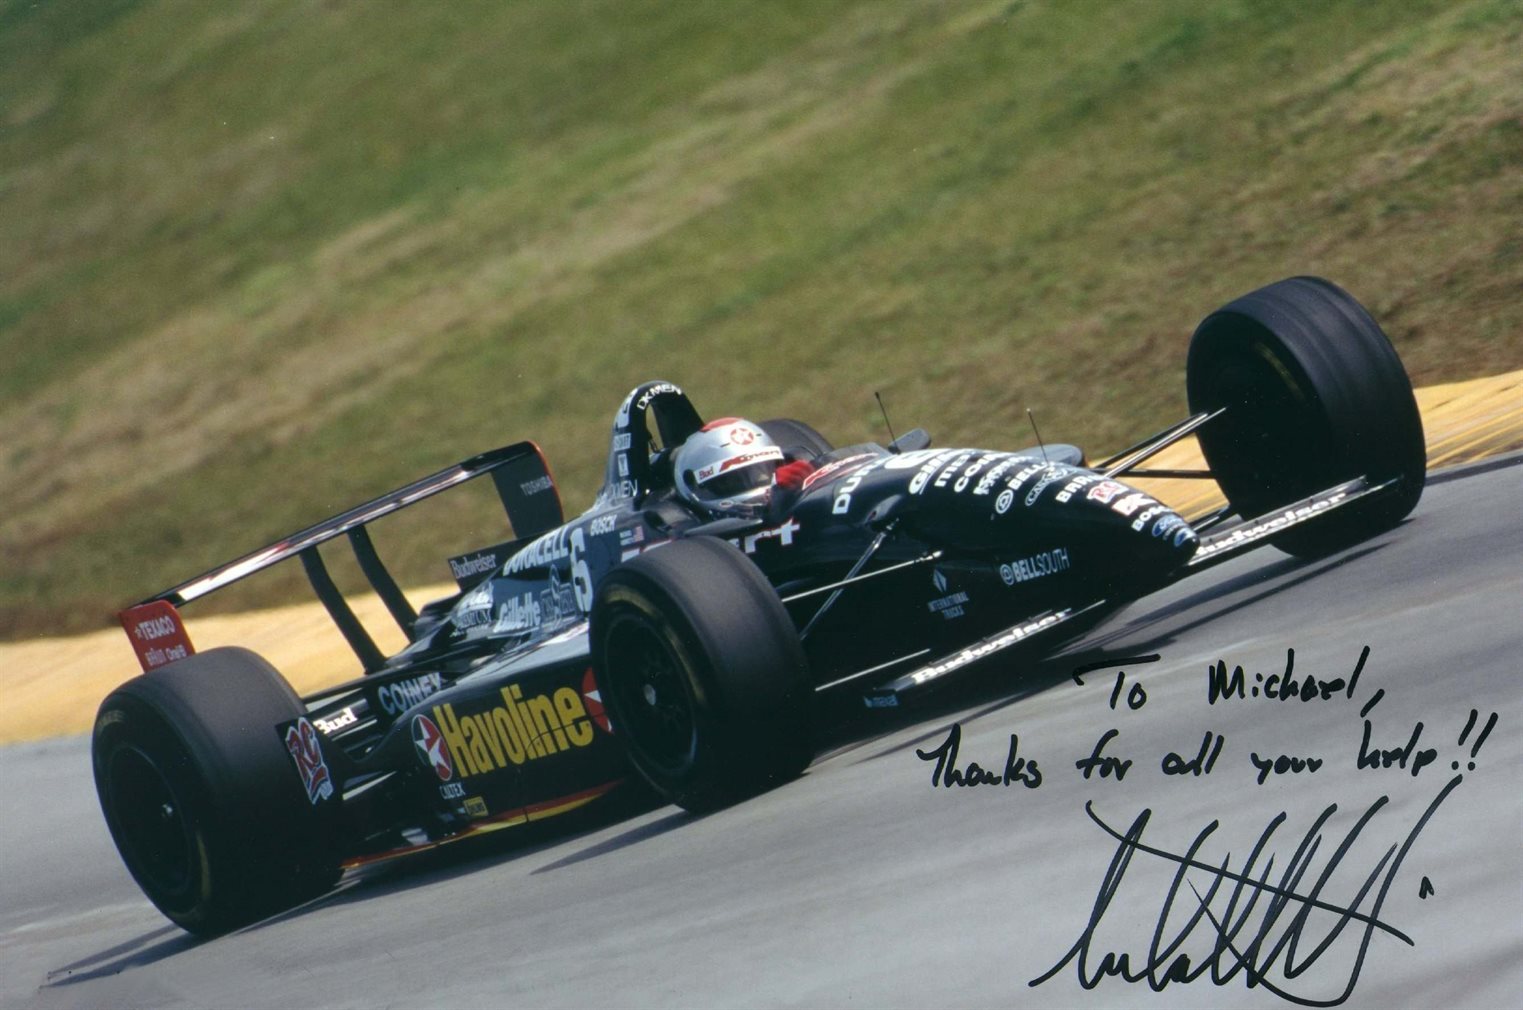 Signed image of Michael Andretti in the Newman/Haas Racing Super Speedway Swift chassis with Selig's UIUC front and rear wings, named &amp;amp;amp;amp;amp;amp;amp;amp;quot;Urbana&amp;amp;amp;amp;amp;amp;amp;amp;quot; in front and &amp;amp;amp;amp;amp;amp;amp;amp;quot;Champaign,&amp;amp;amp;amp;amp;amp;amp;amp;quot; rear by the team.